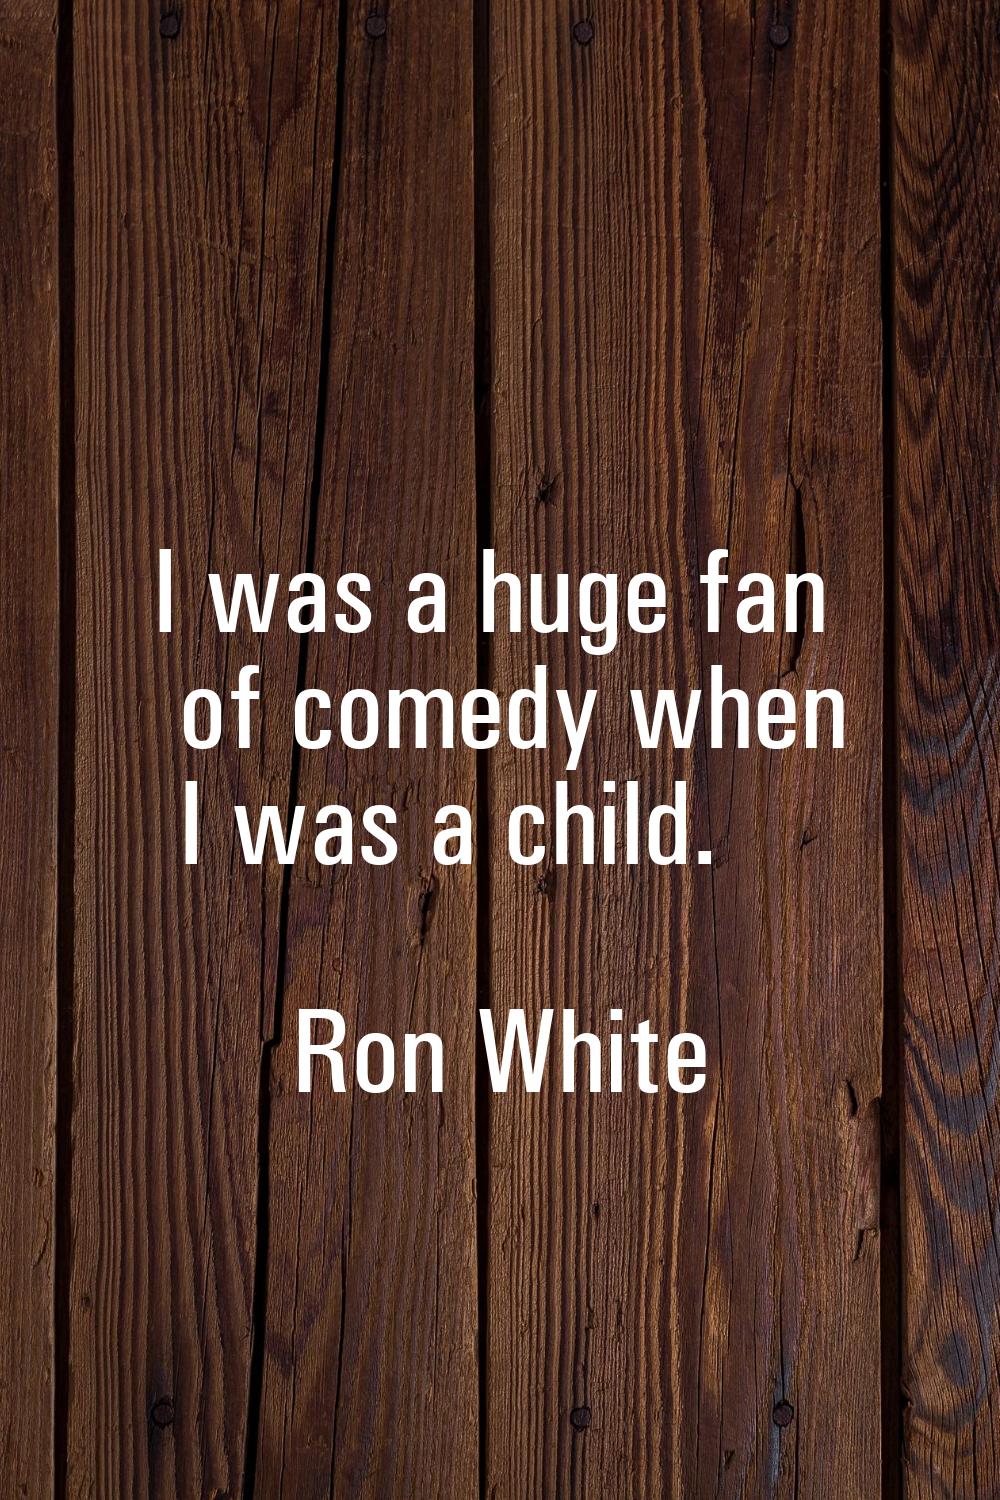 I was a huge fan of comedy when I was a child.